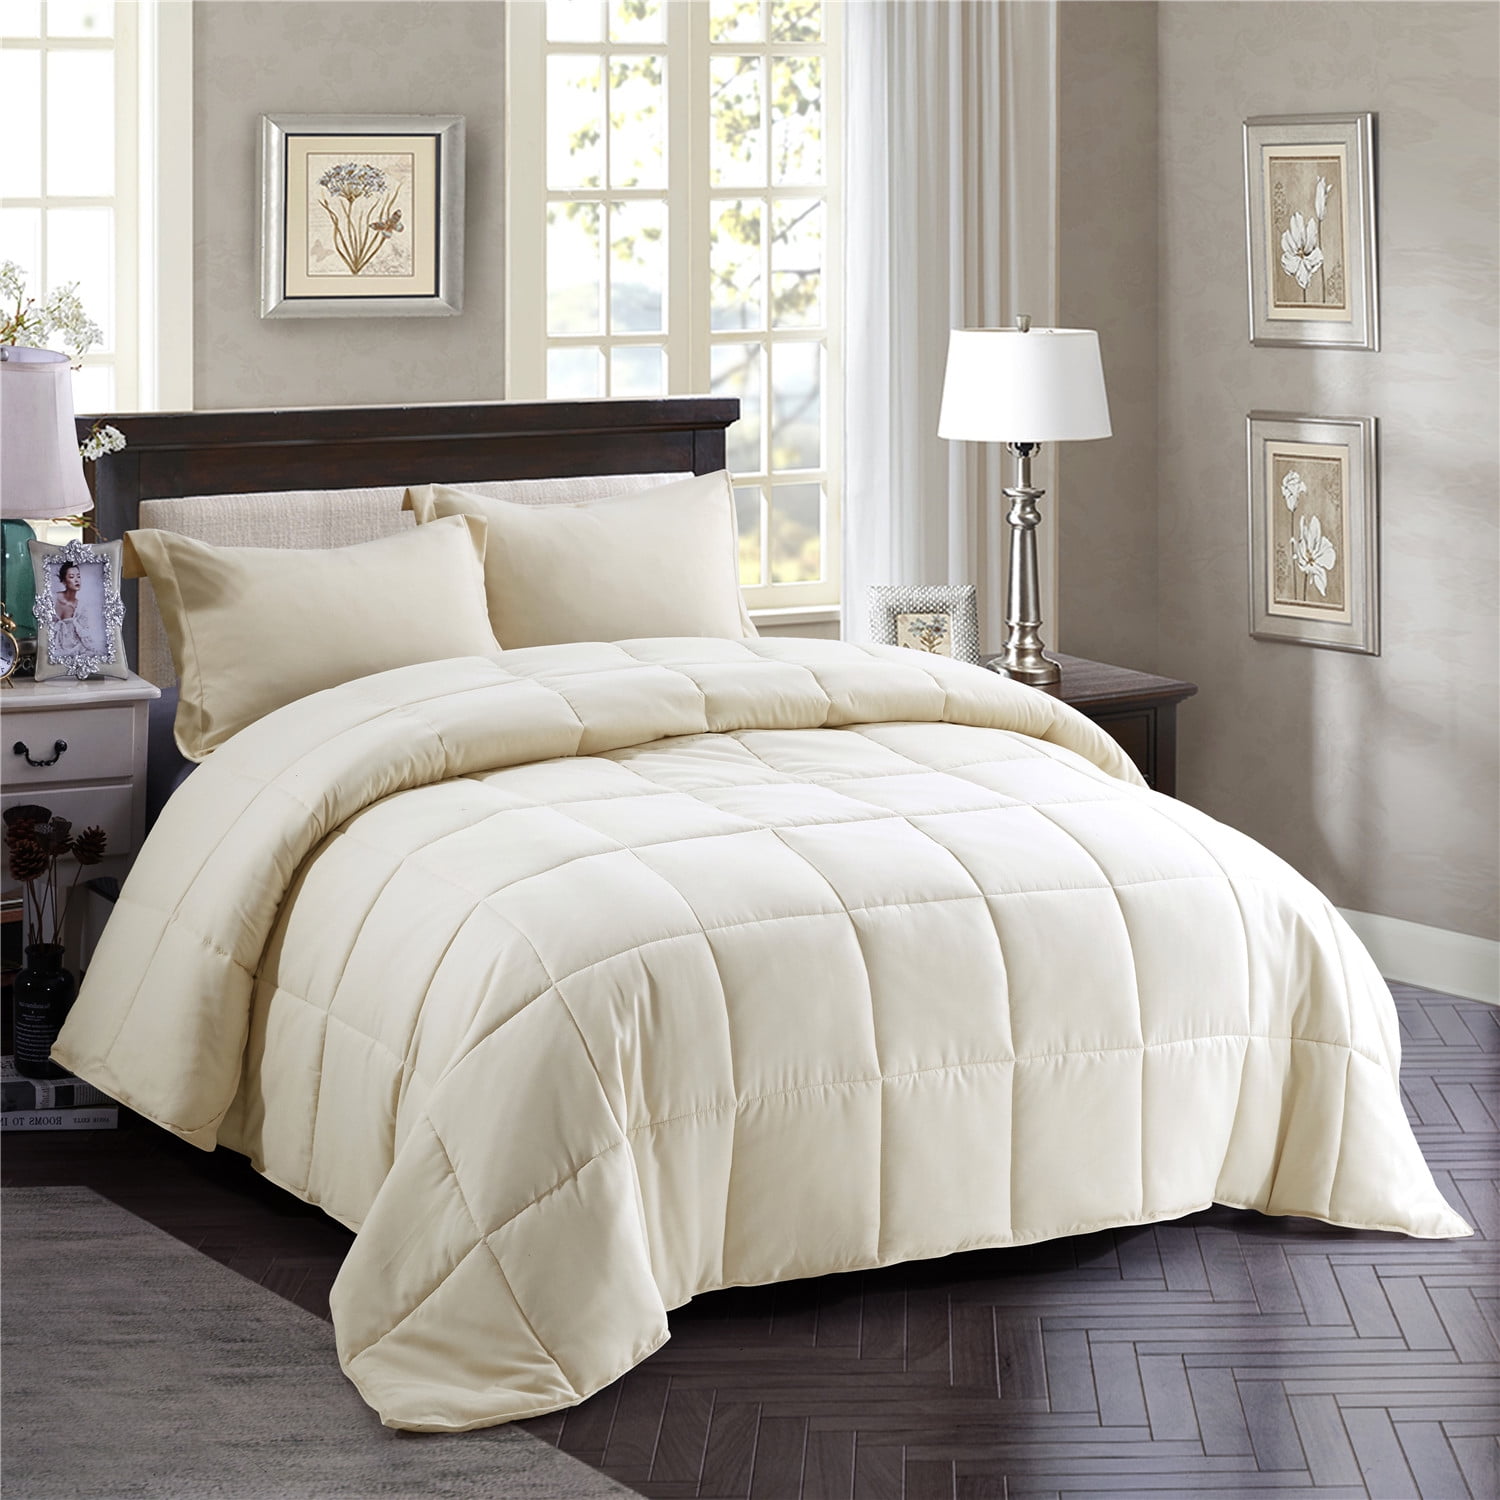 Details about   3 Pieces Embossed Down Alternative Comforter Bedding Set With Sham Pillow Cases